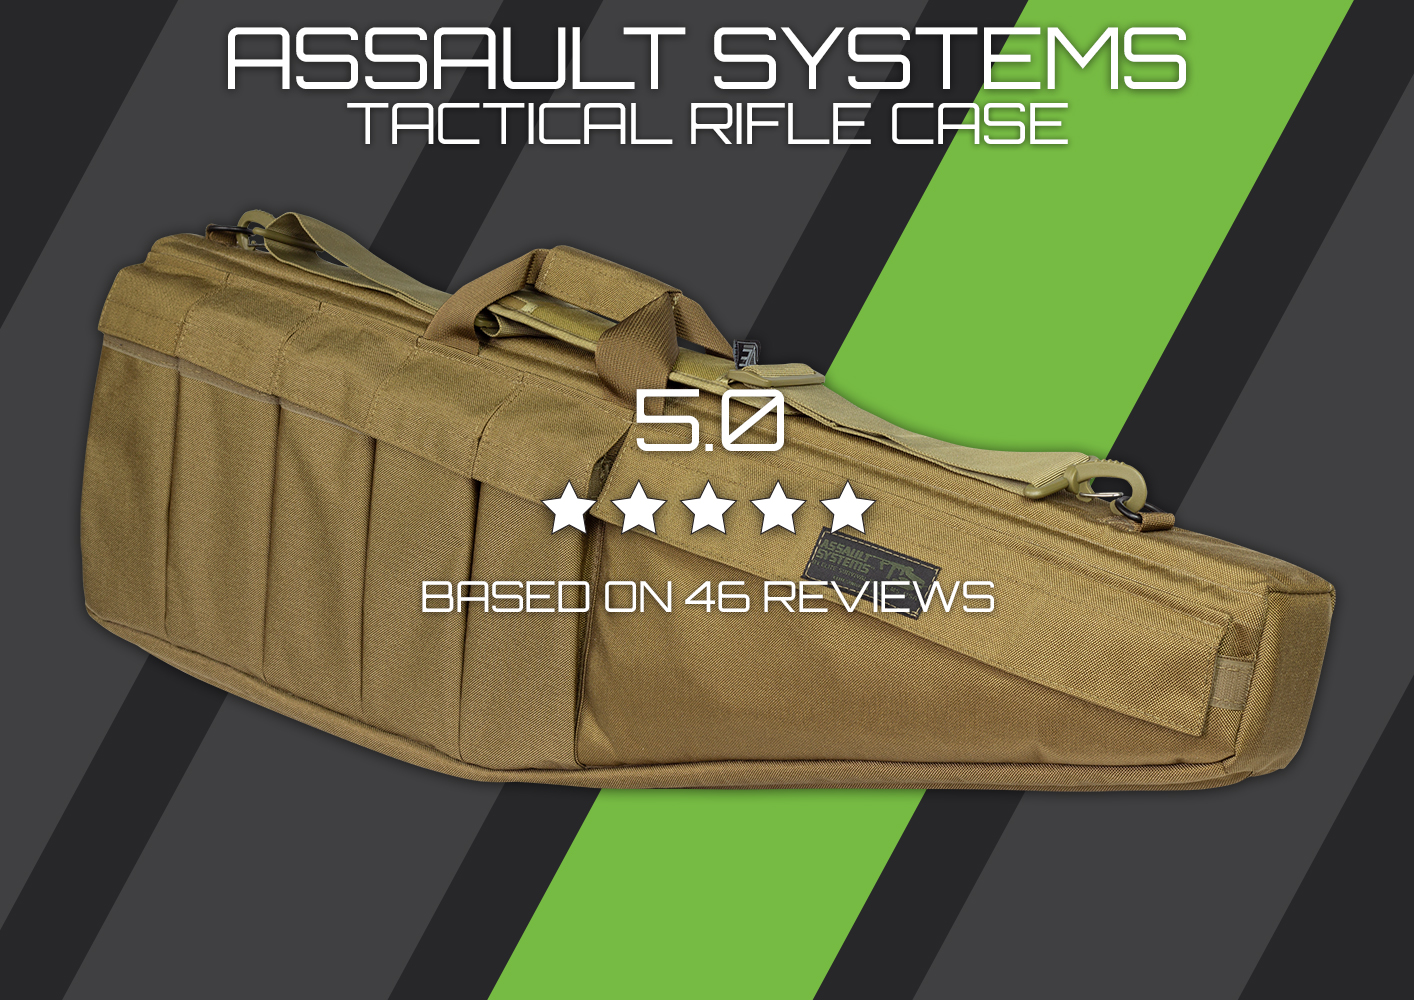 Elite Survival Assault Systems Rifle Case - Tactical Case for Secure and Easy Transportation of Assault Rifles. Durable and Spacious Design. Buy Now!